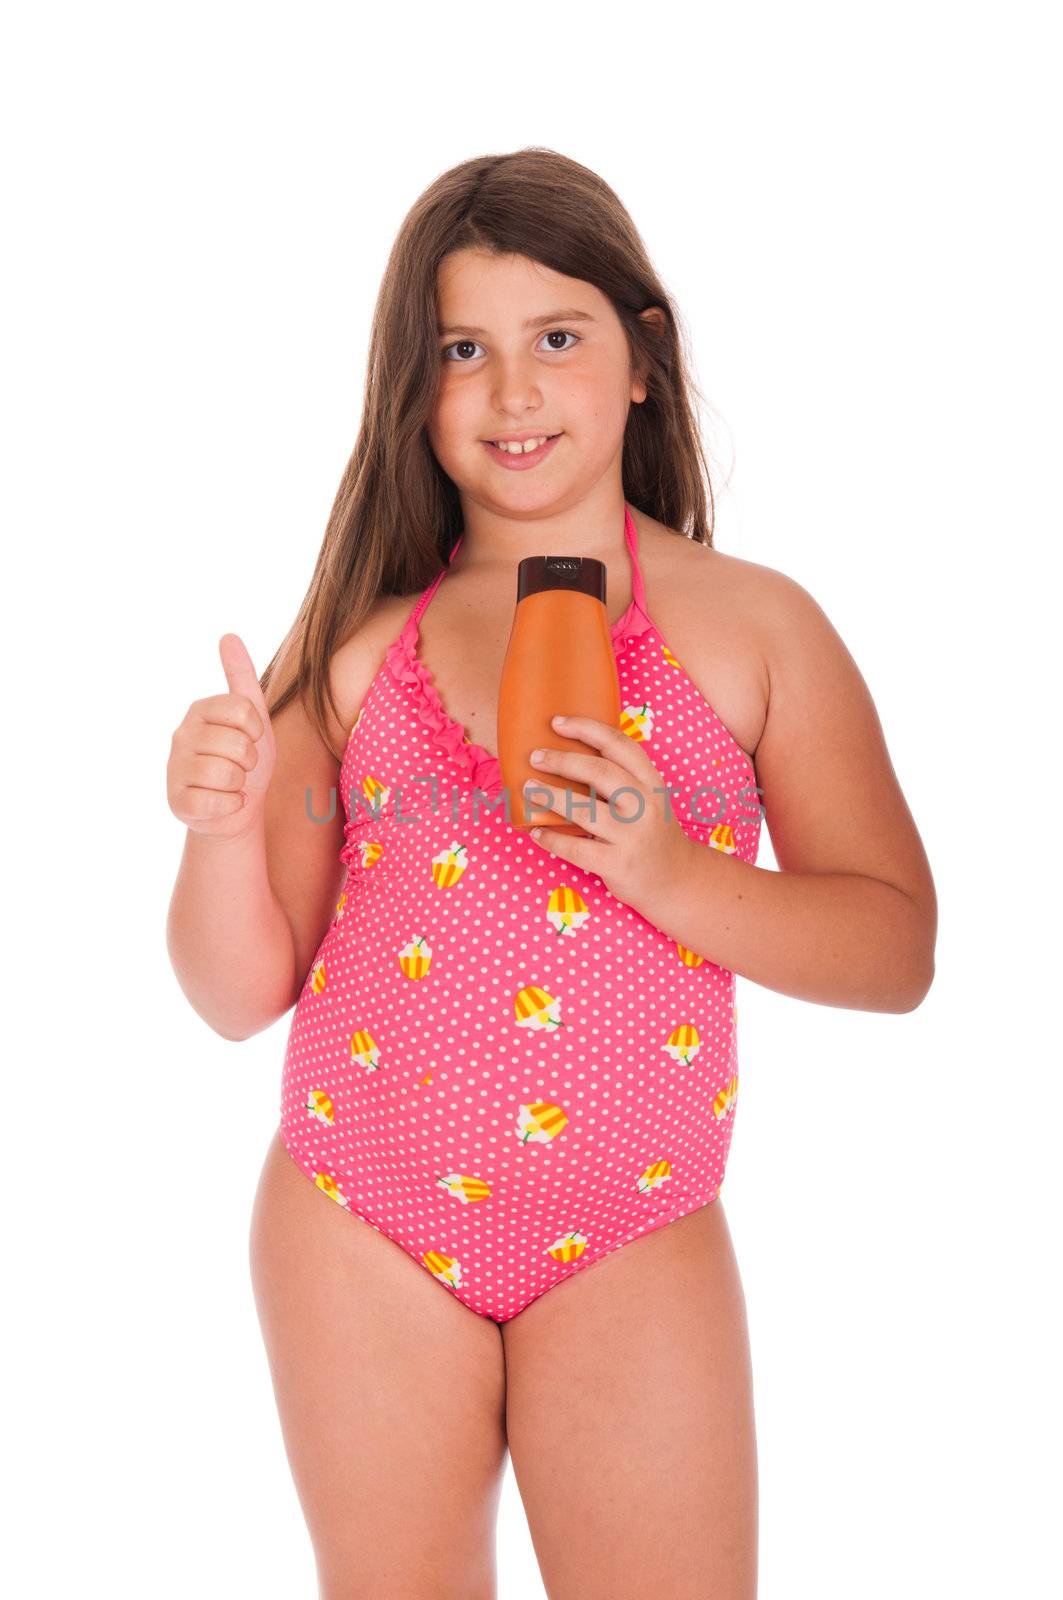 beautiful brunette teenage girl in swimsuit showing thumb up while holding sun lotion (isolated on white background)